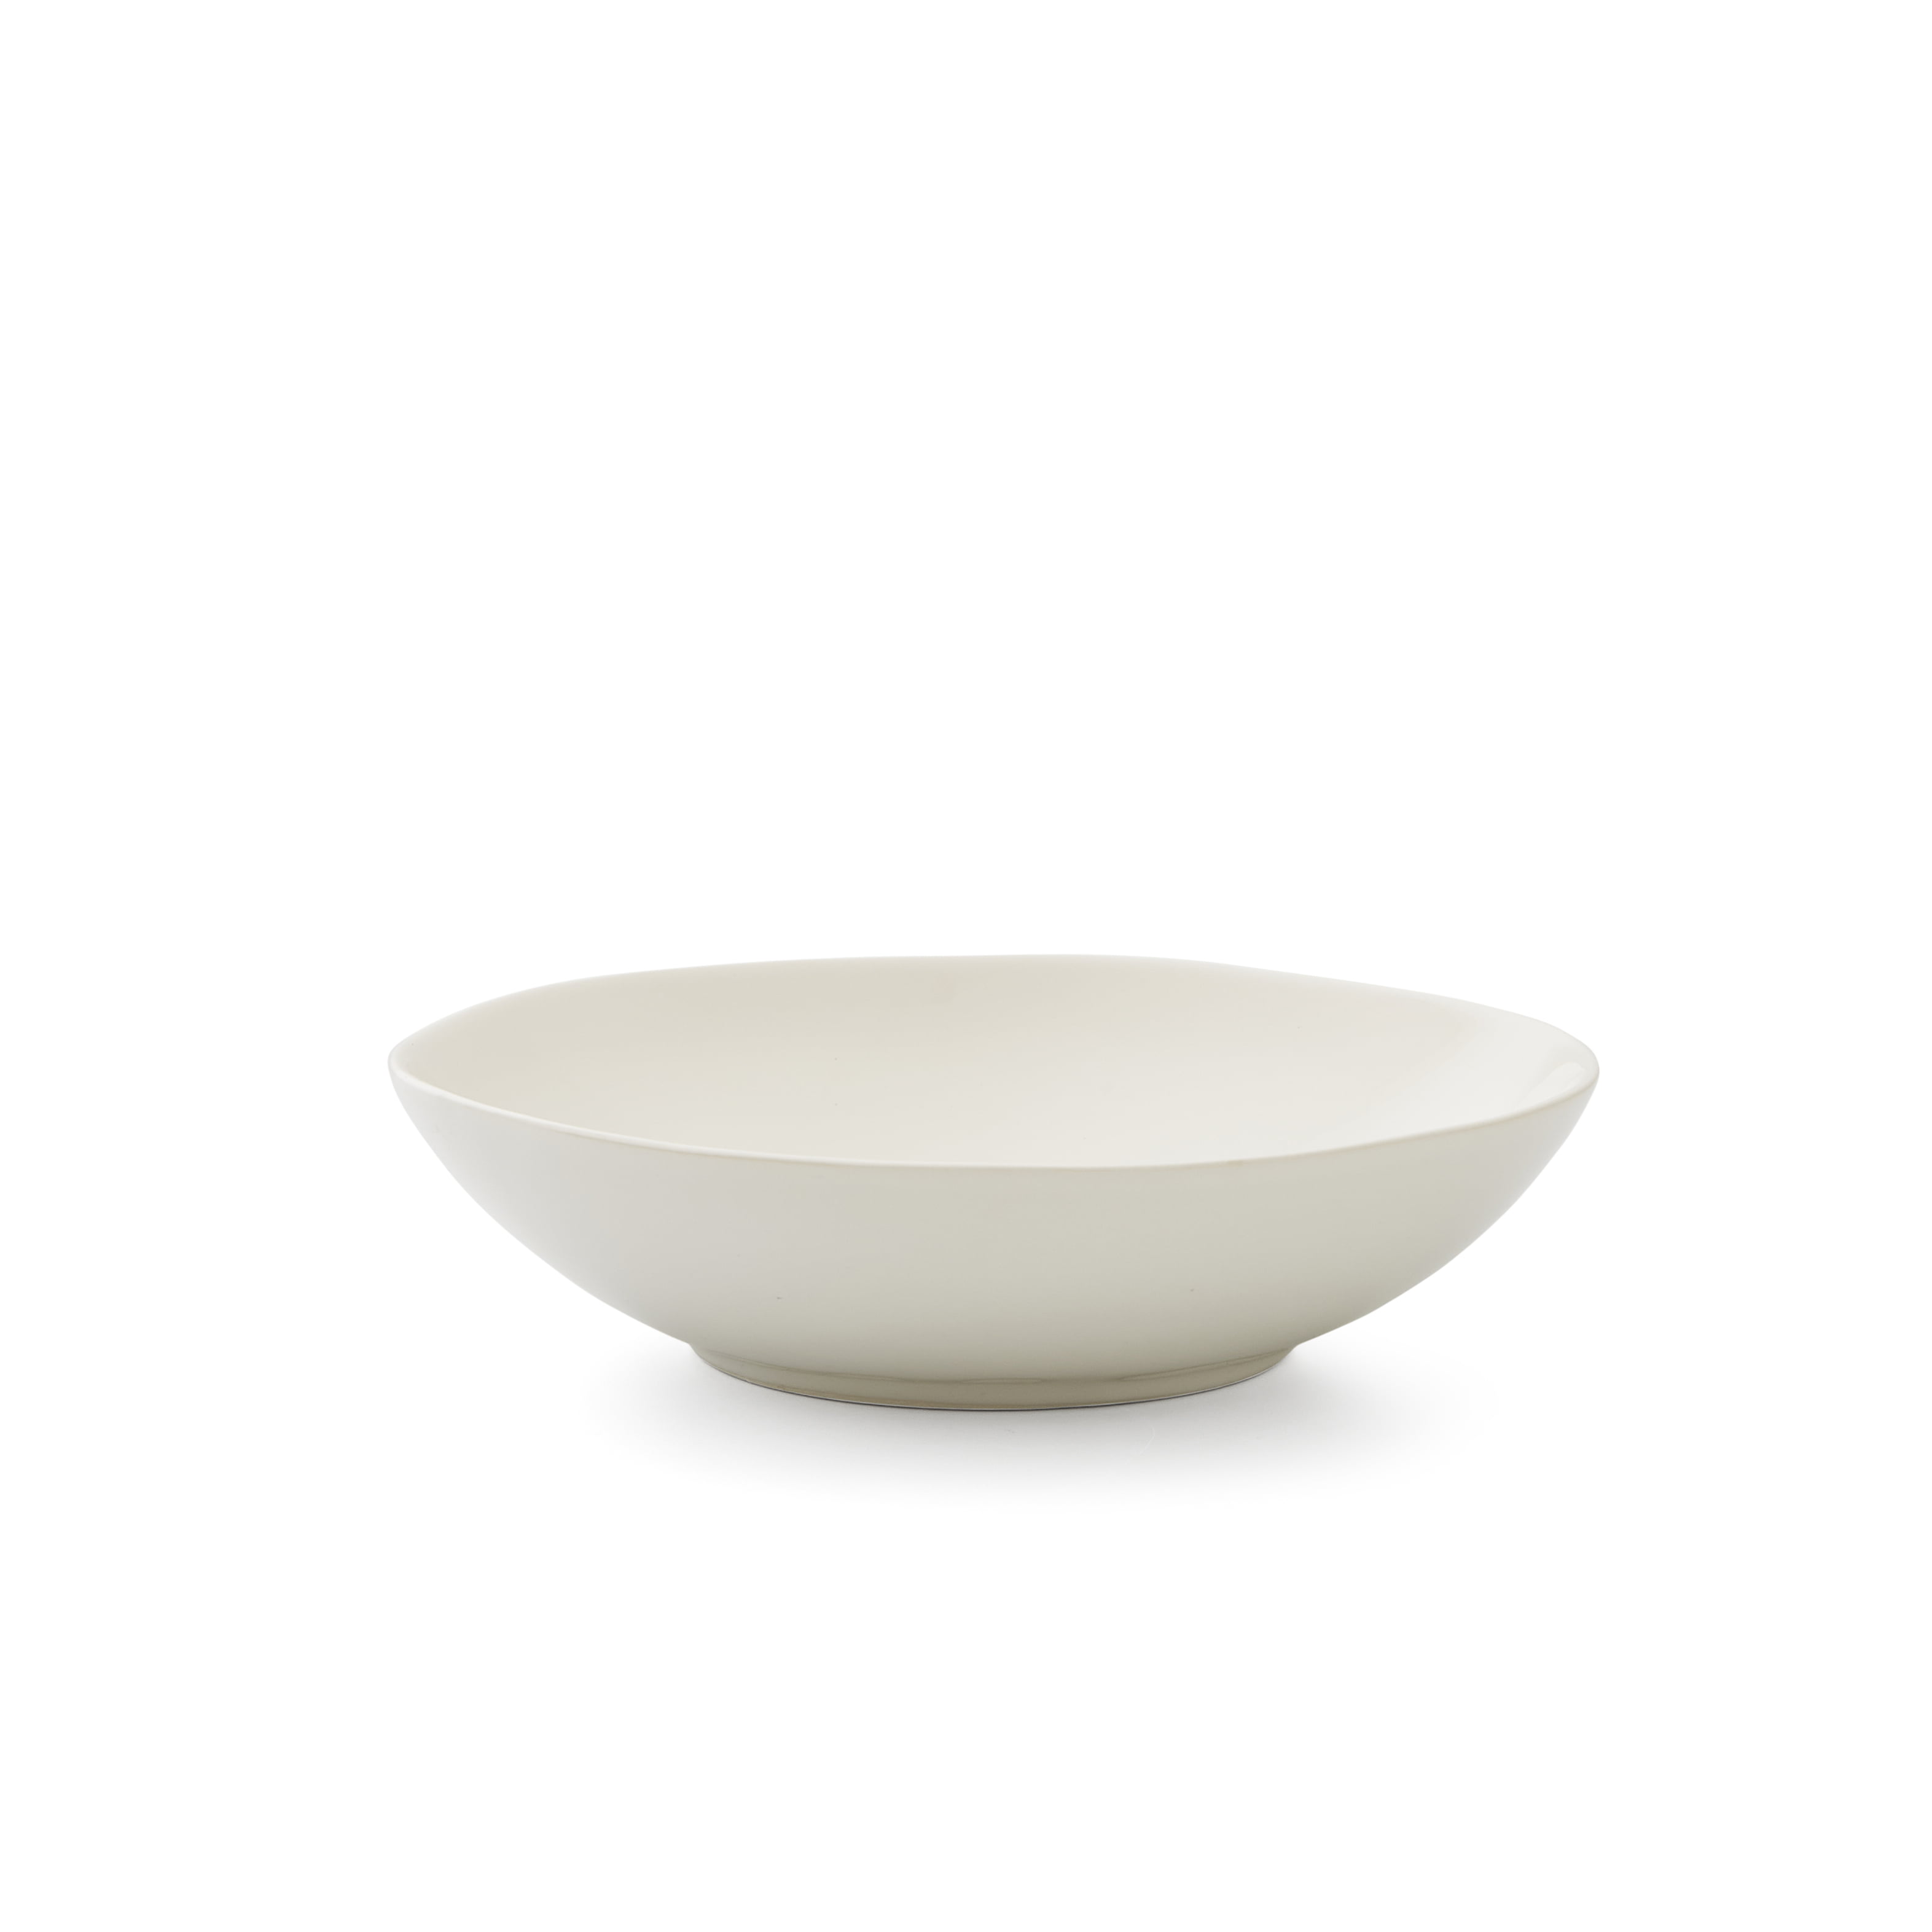 12 by 12 by 1-3/4-Inch 12-Pack CAC China REC-121 Rolled Edge 18-Ounce American White Stoneware Round Pasta Bowl